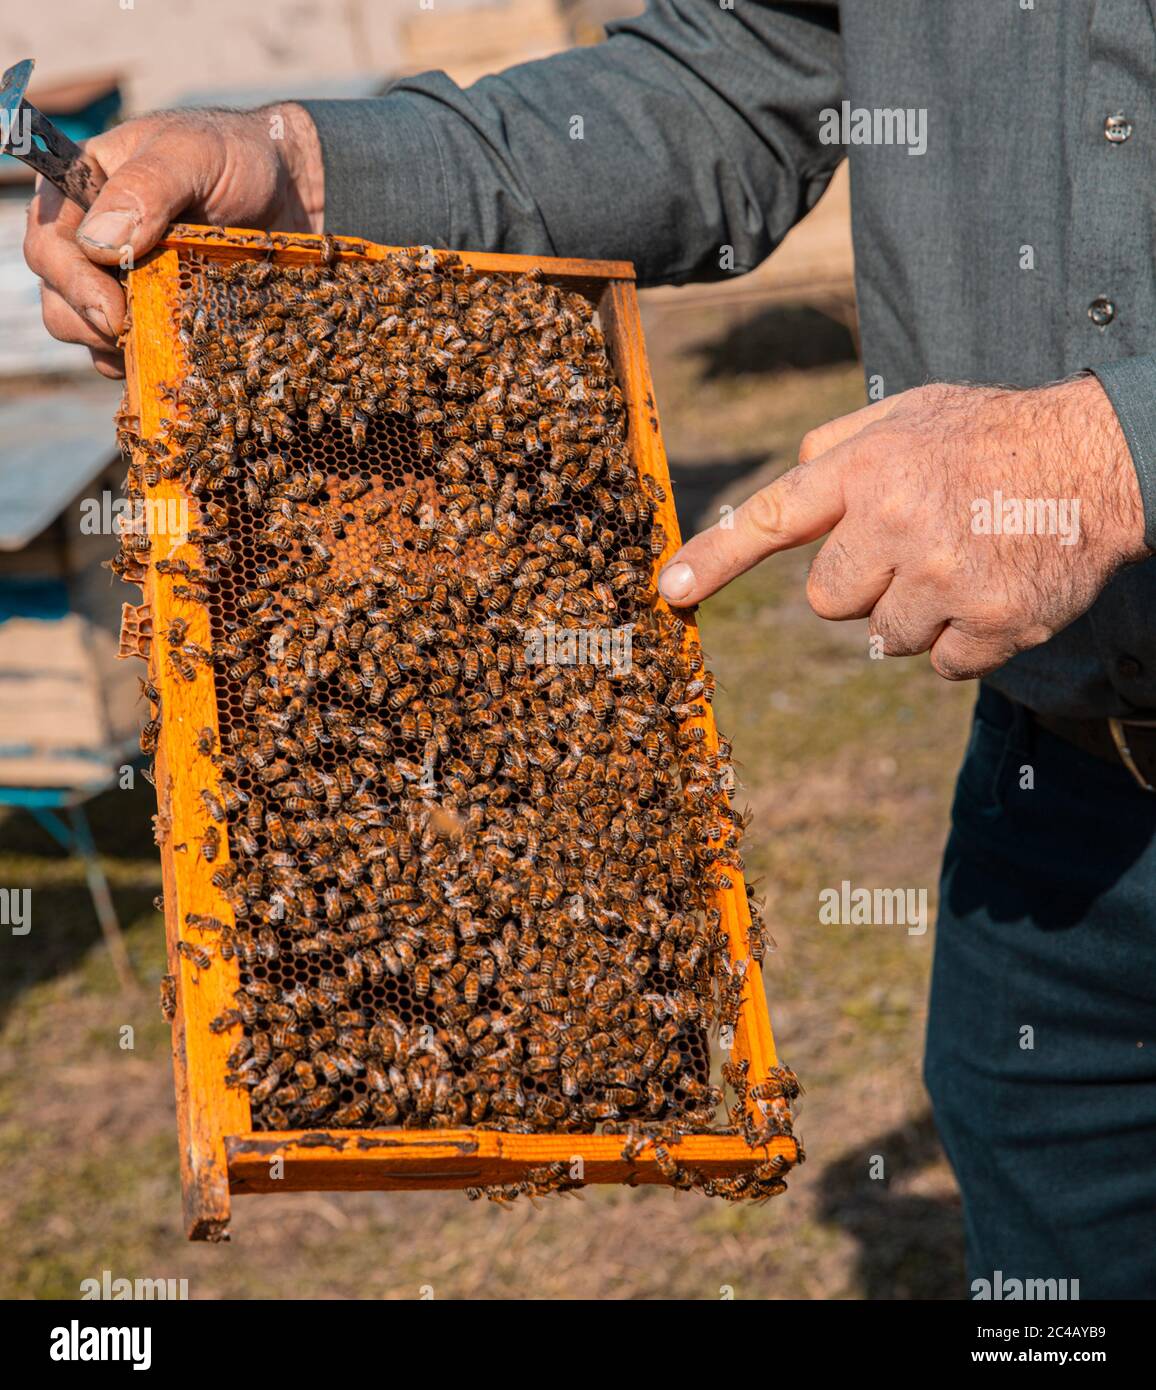 A beekeeper demonstrating beehive with lots of honey bees Stock Photo